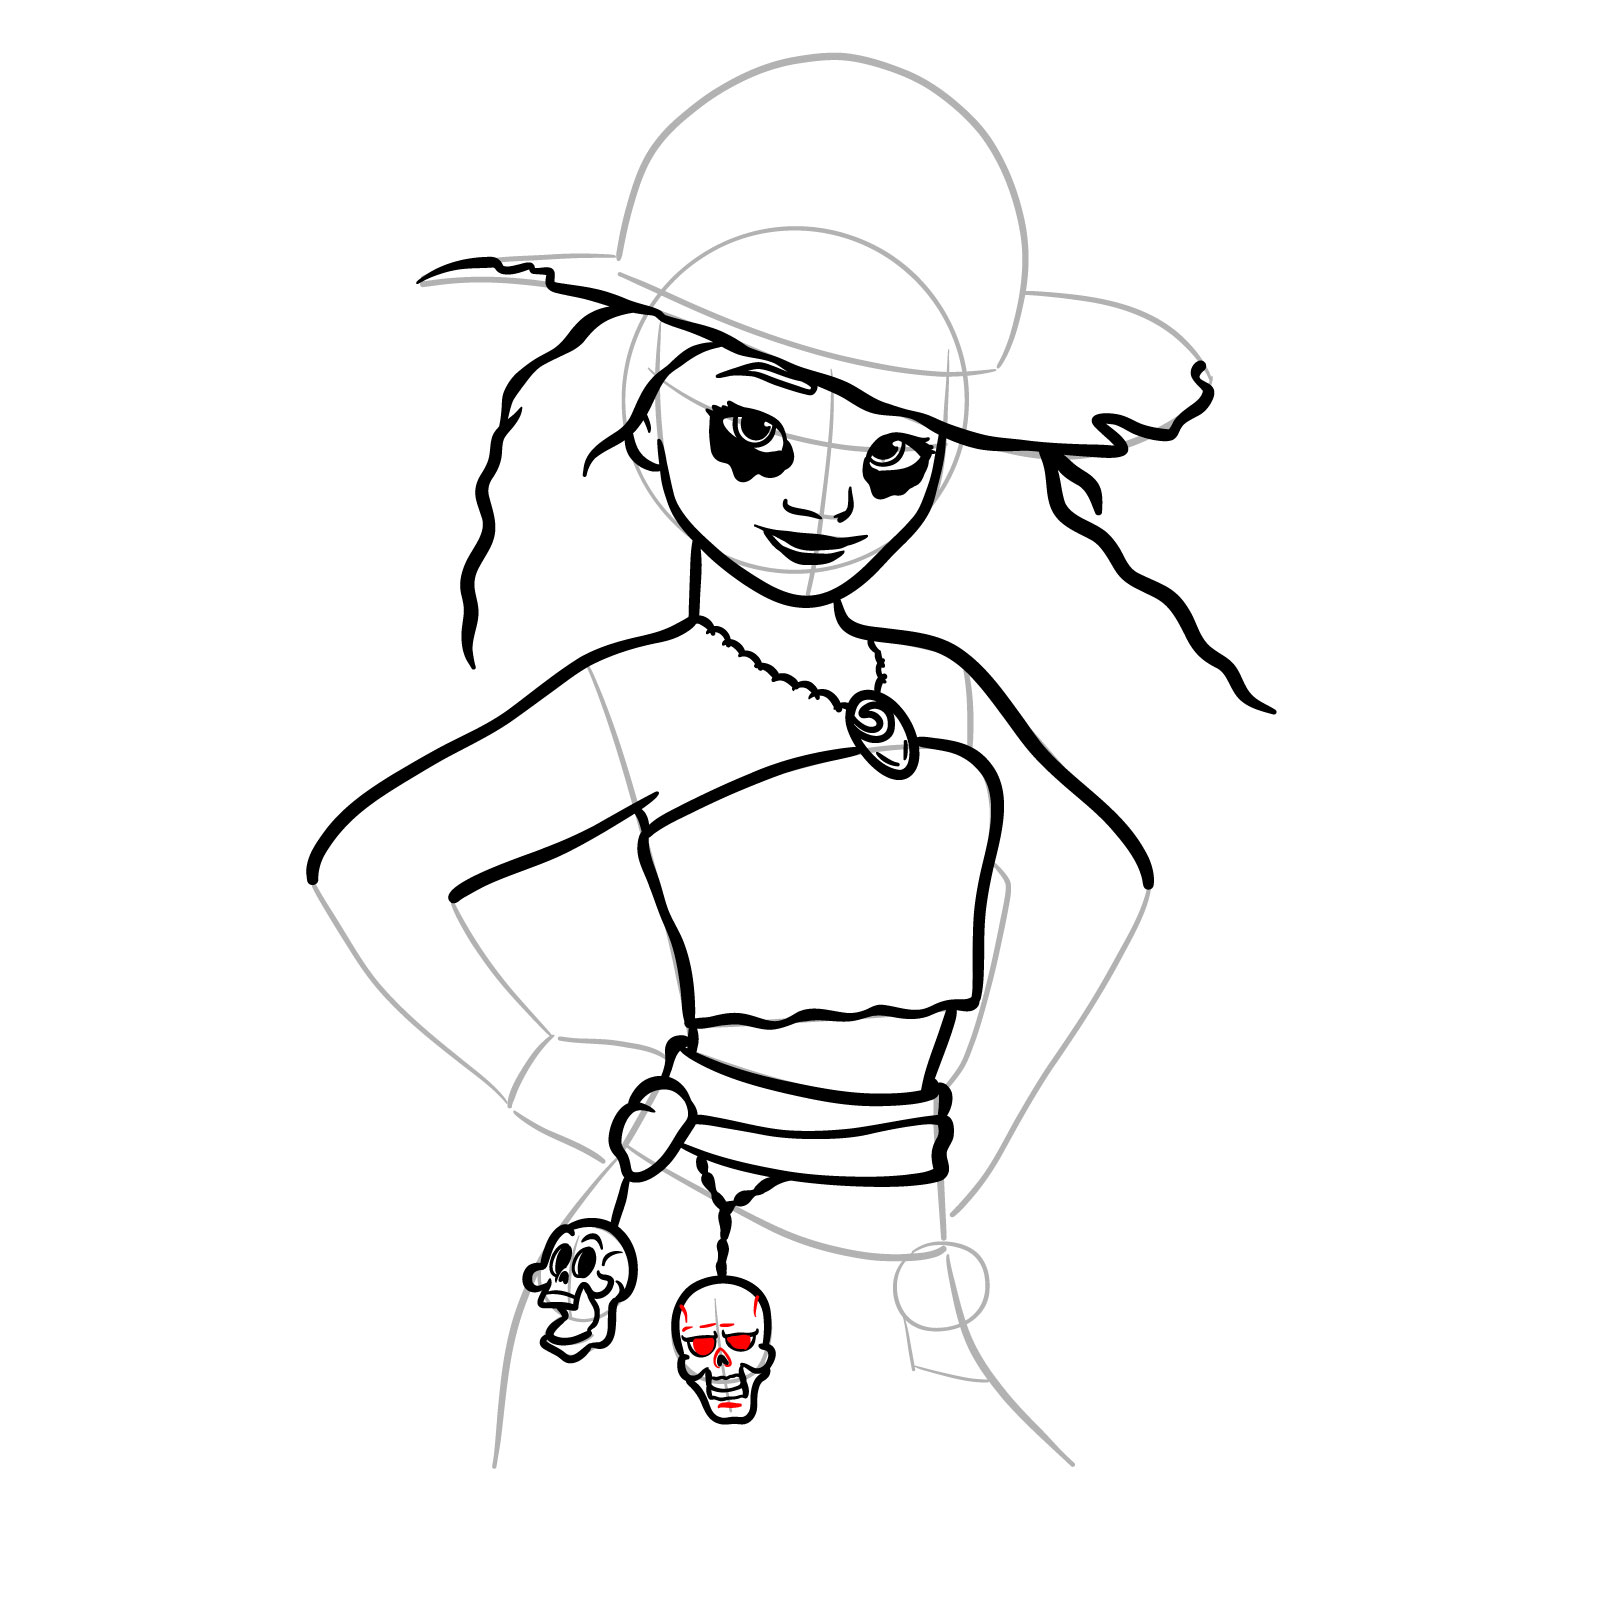 How to Draw Halloween Moana as a Staw Hat Pirate - step 23